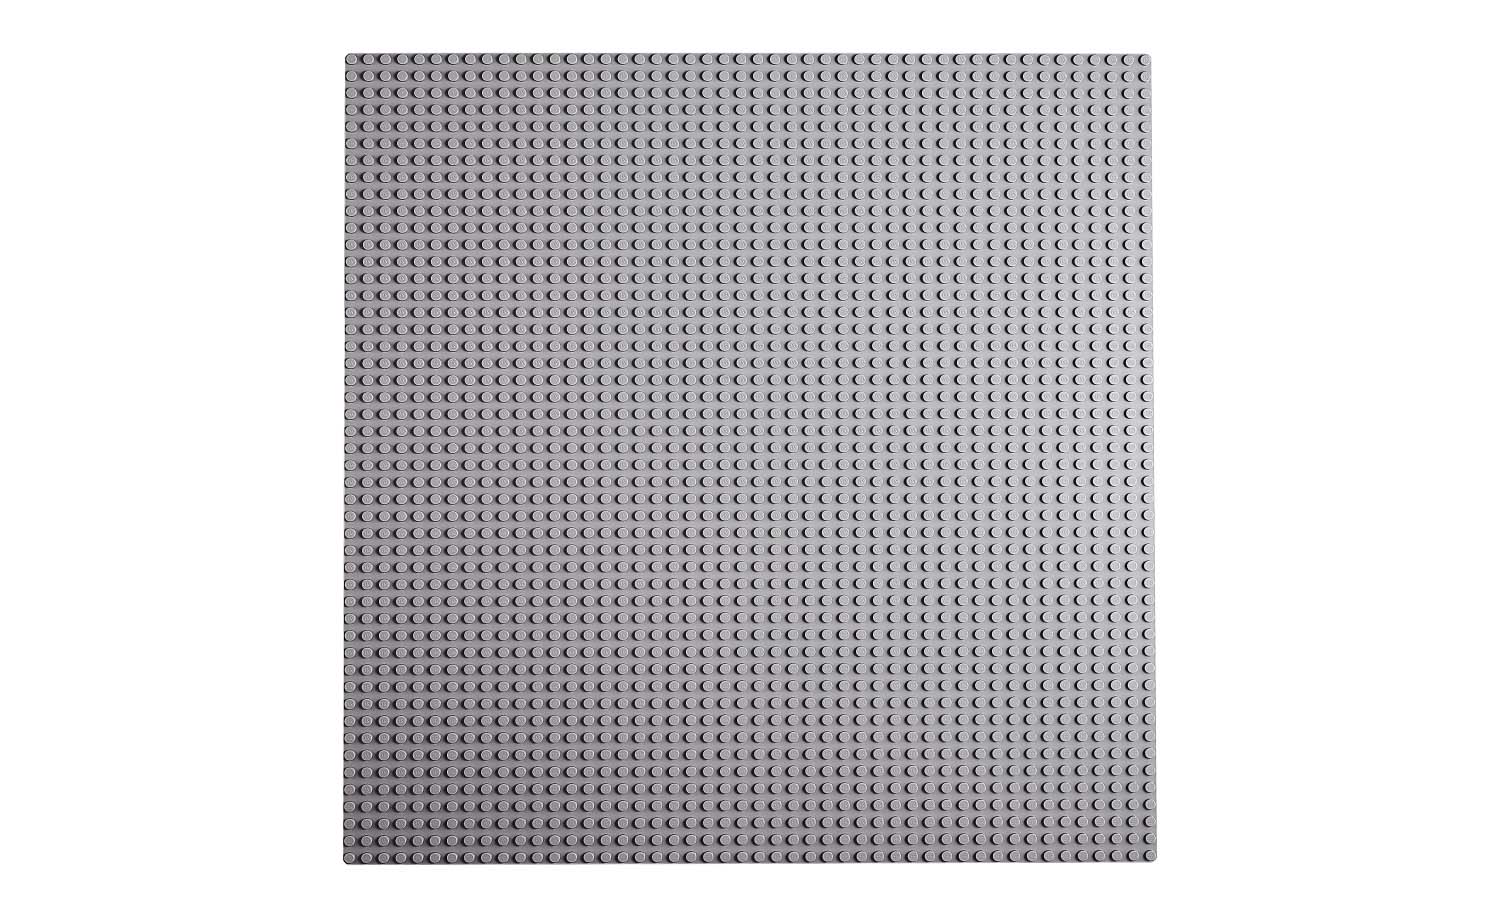 11024  LEGO® Classic Grey Baseplate – LEGO Certified Stores